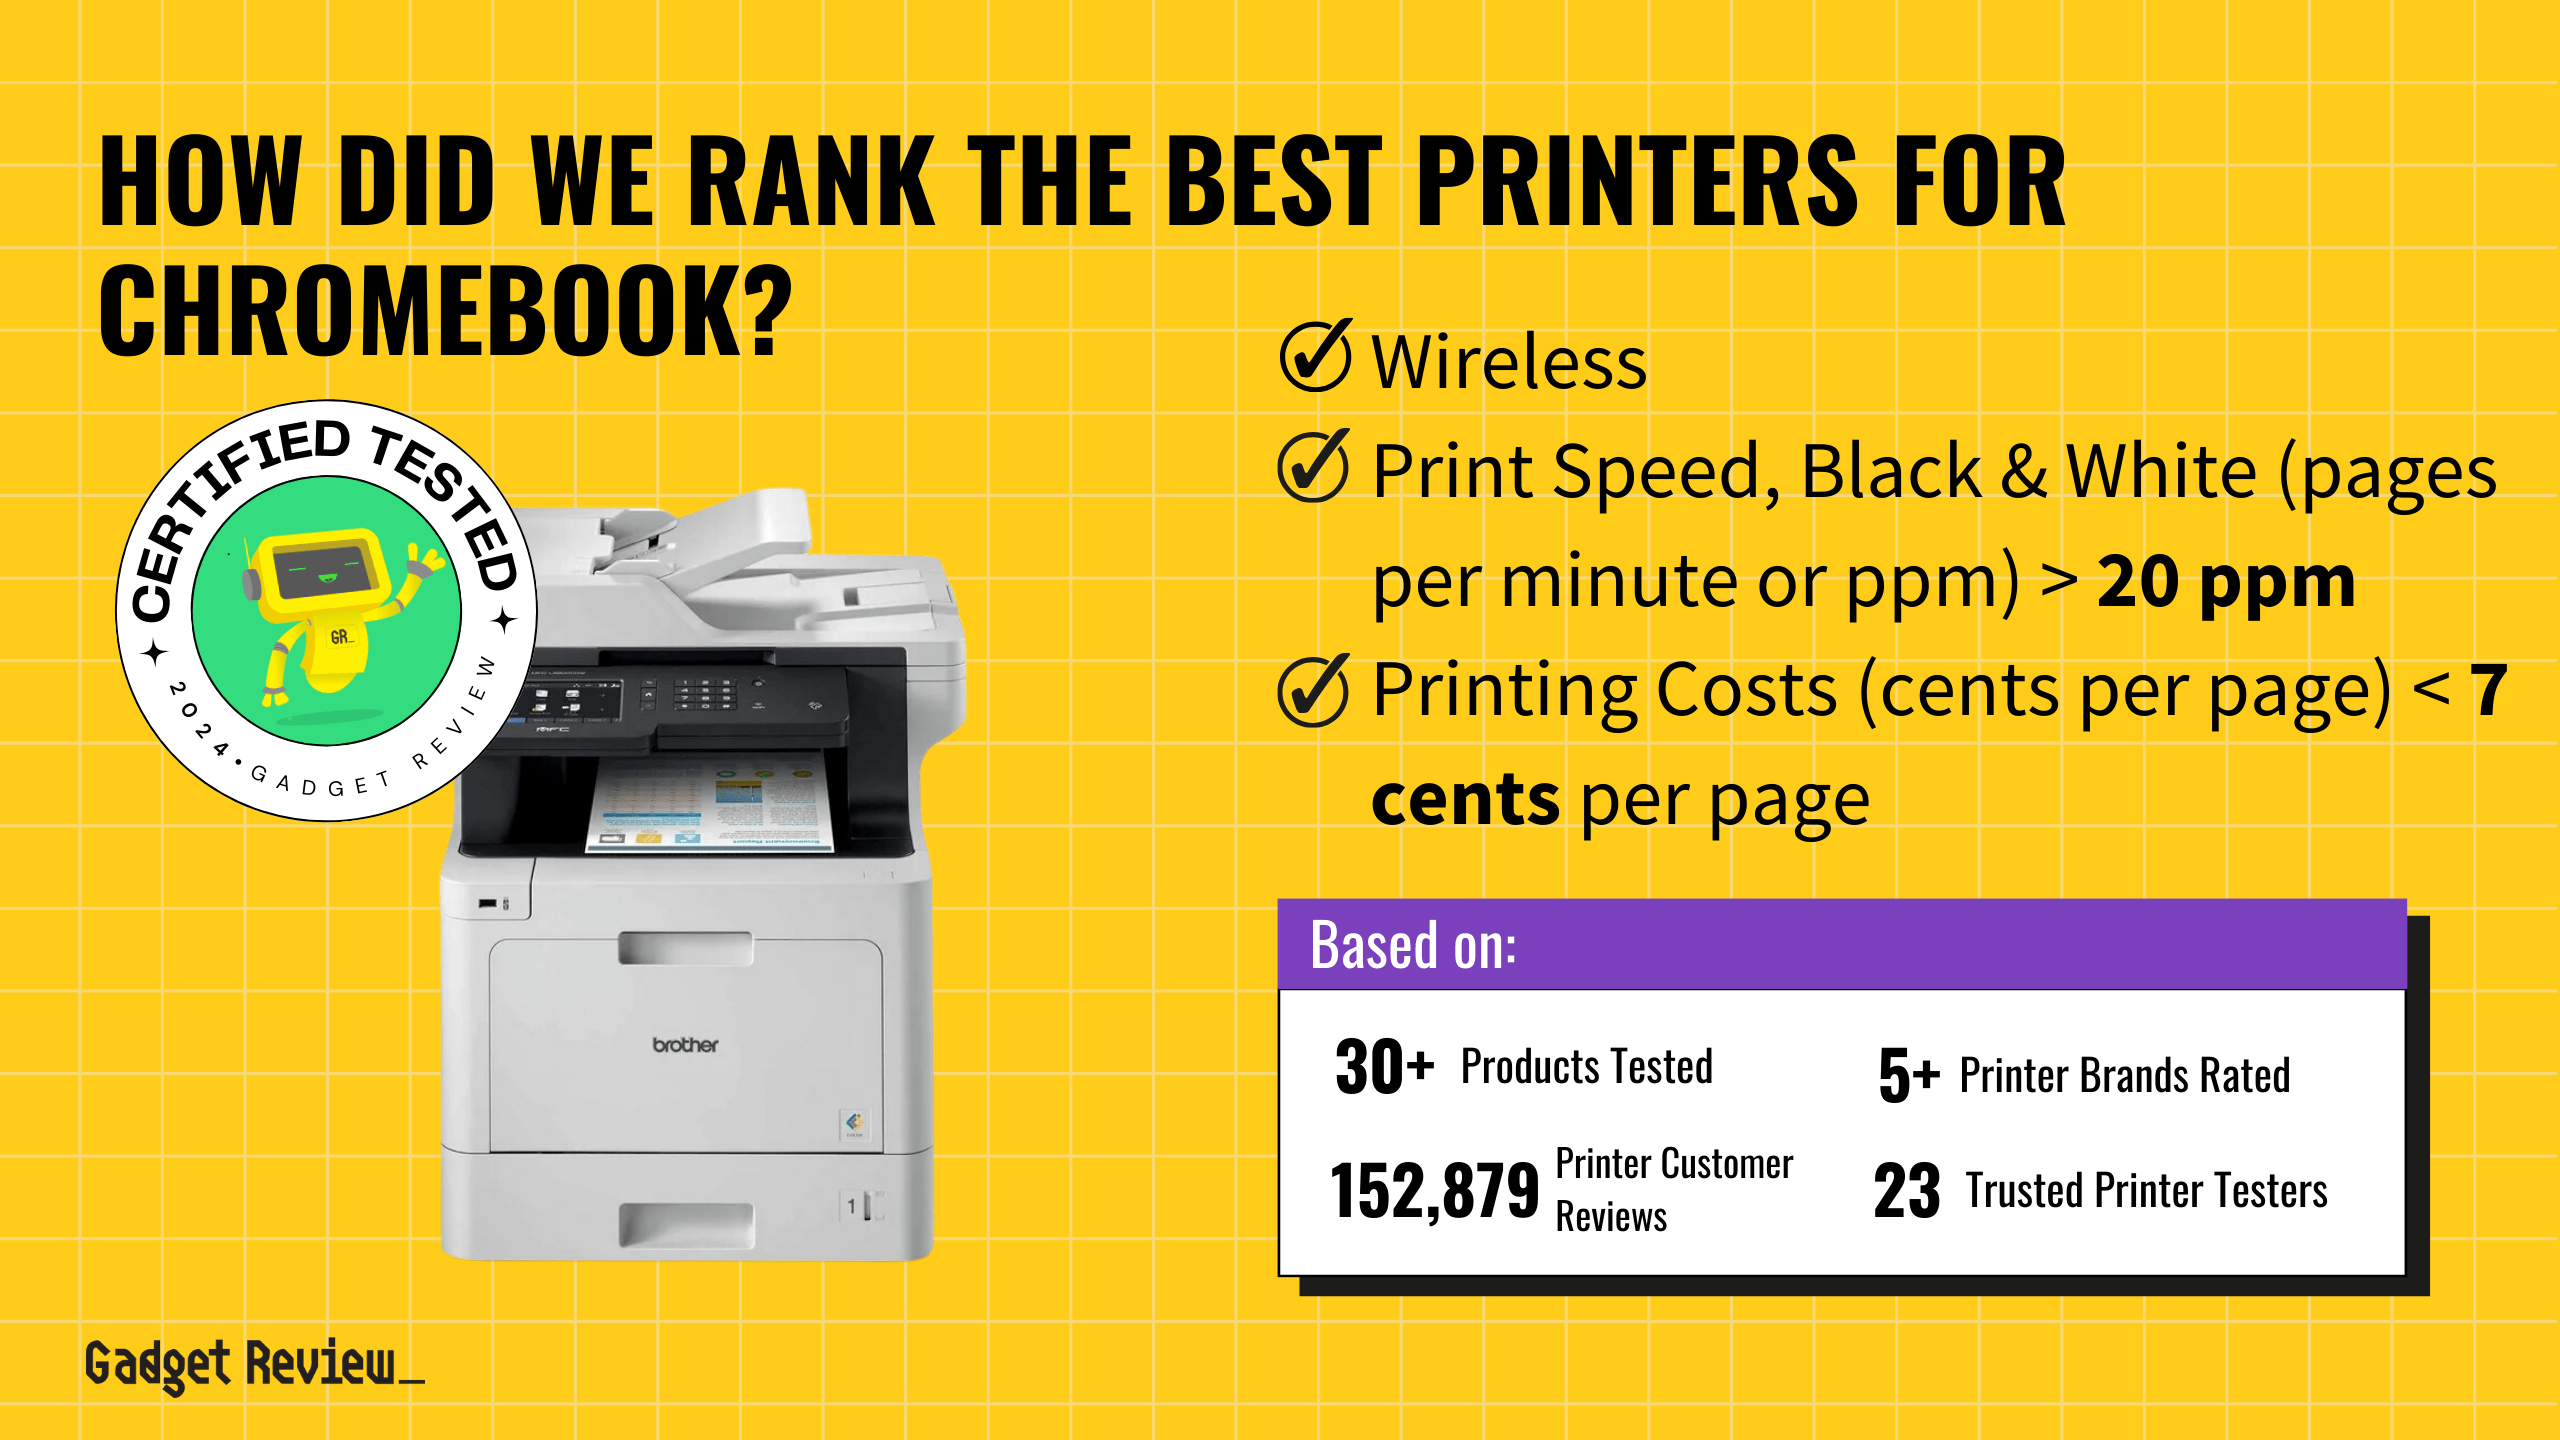 What’s the Best Printers for Chromebook? 5 Options Ranked